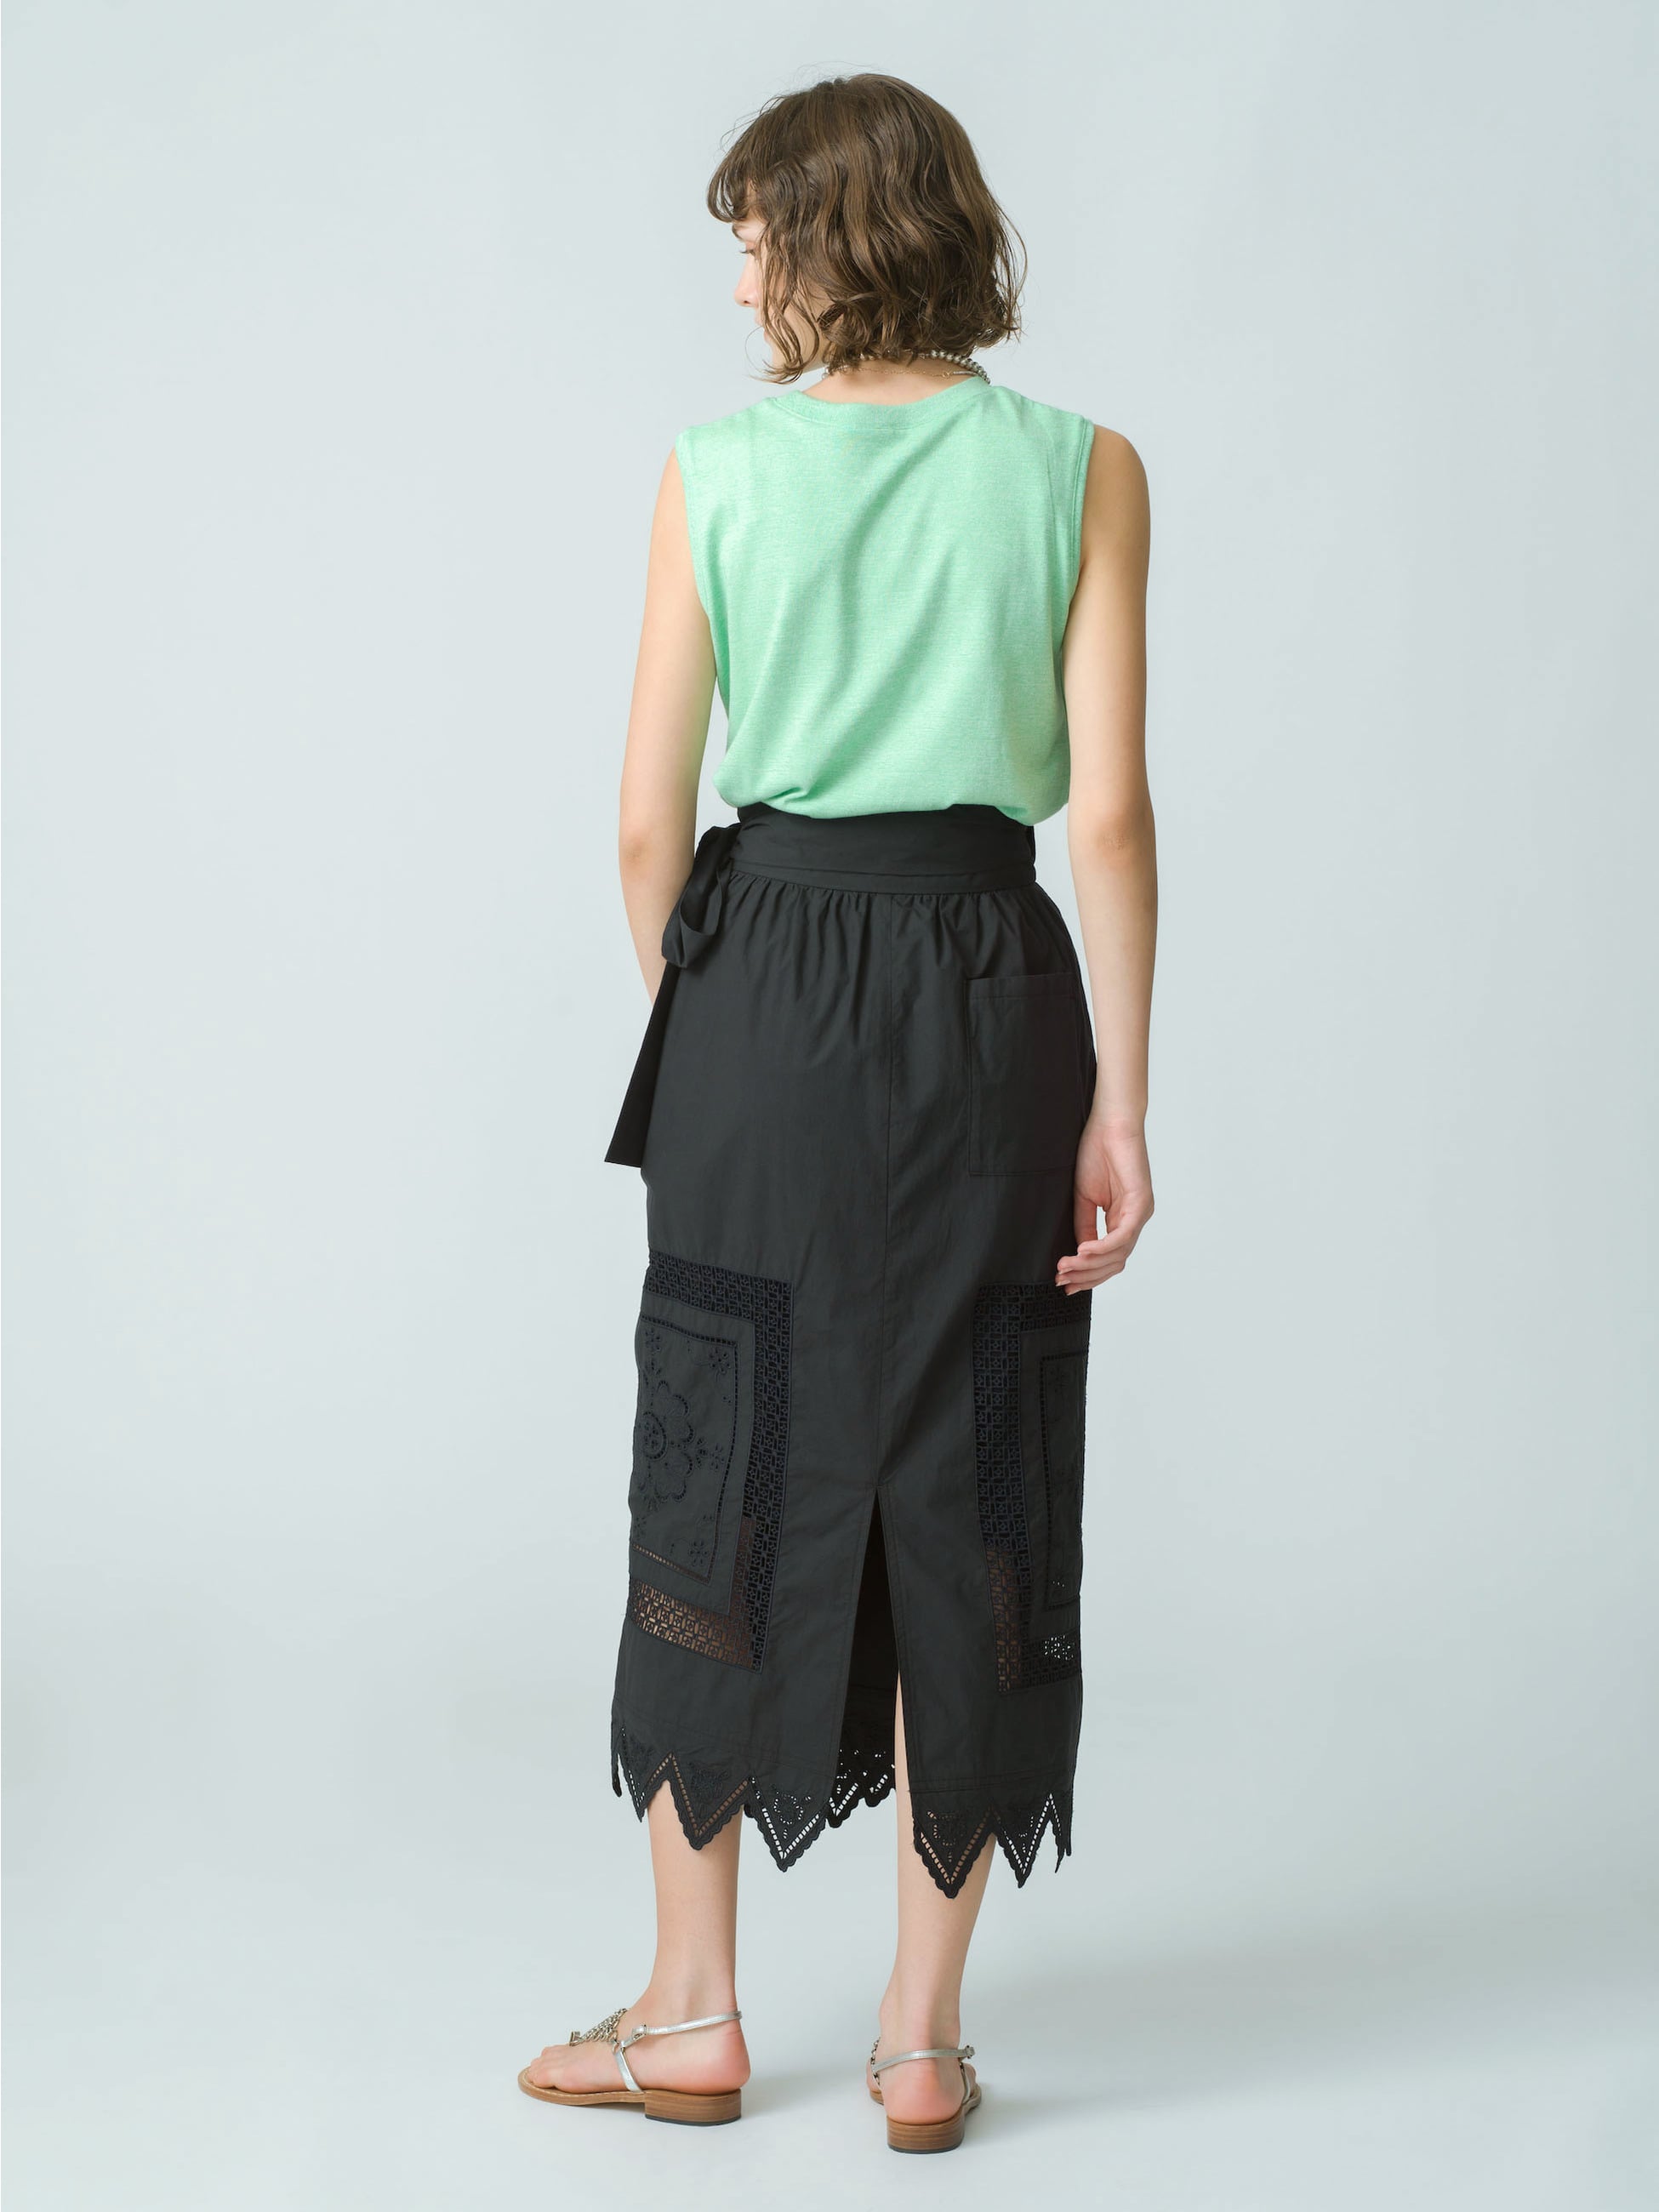 Embroidery Lace Wrap Skirt｜Ron Herman(ロンハーマン)｜Ron Herman